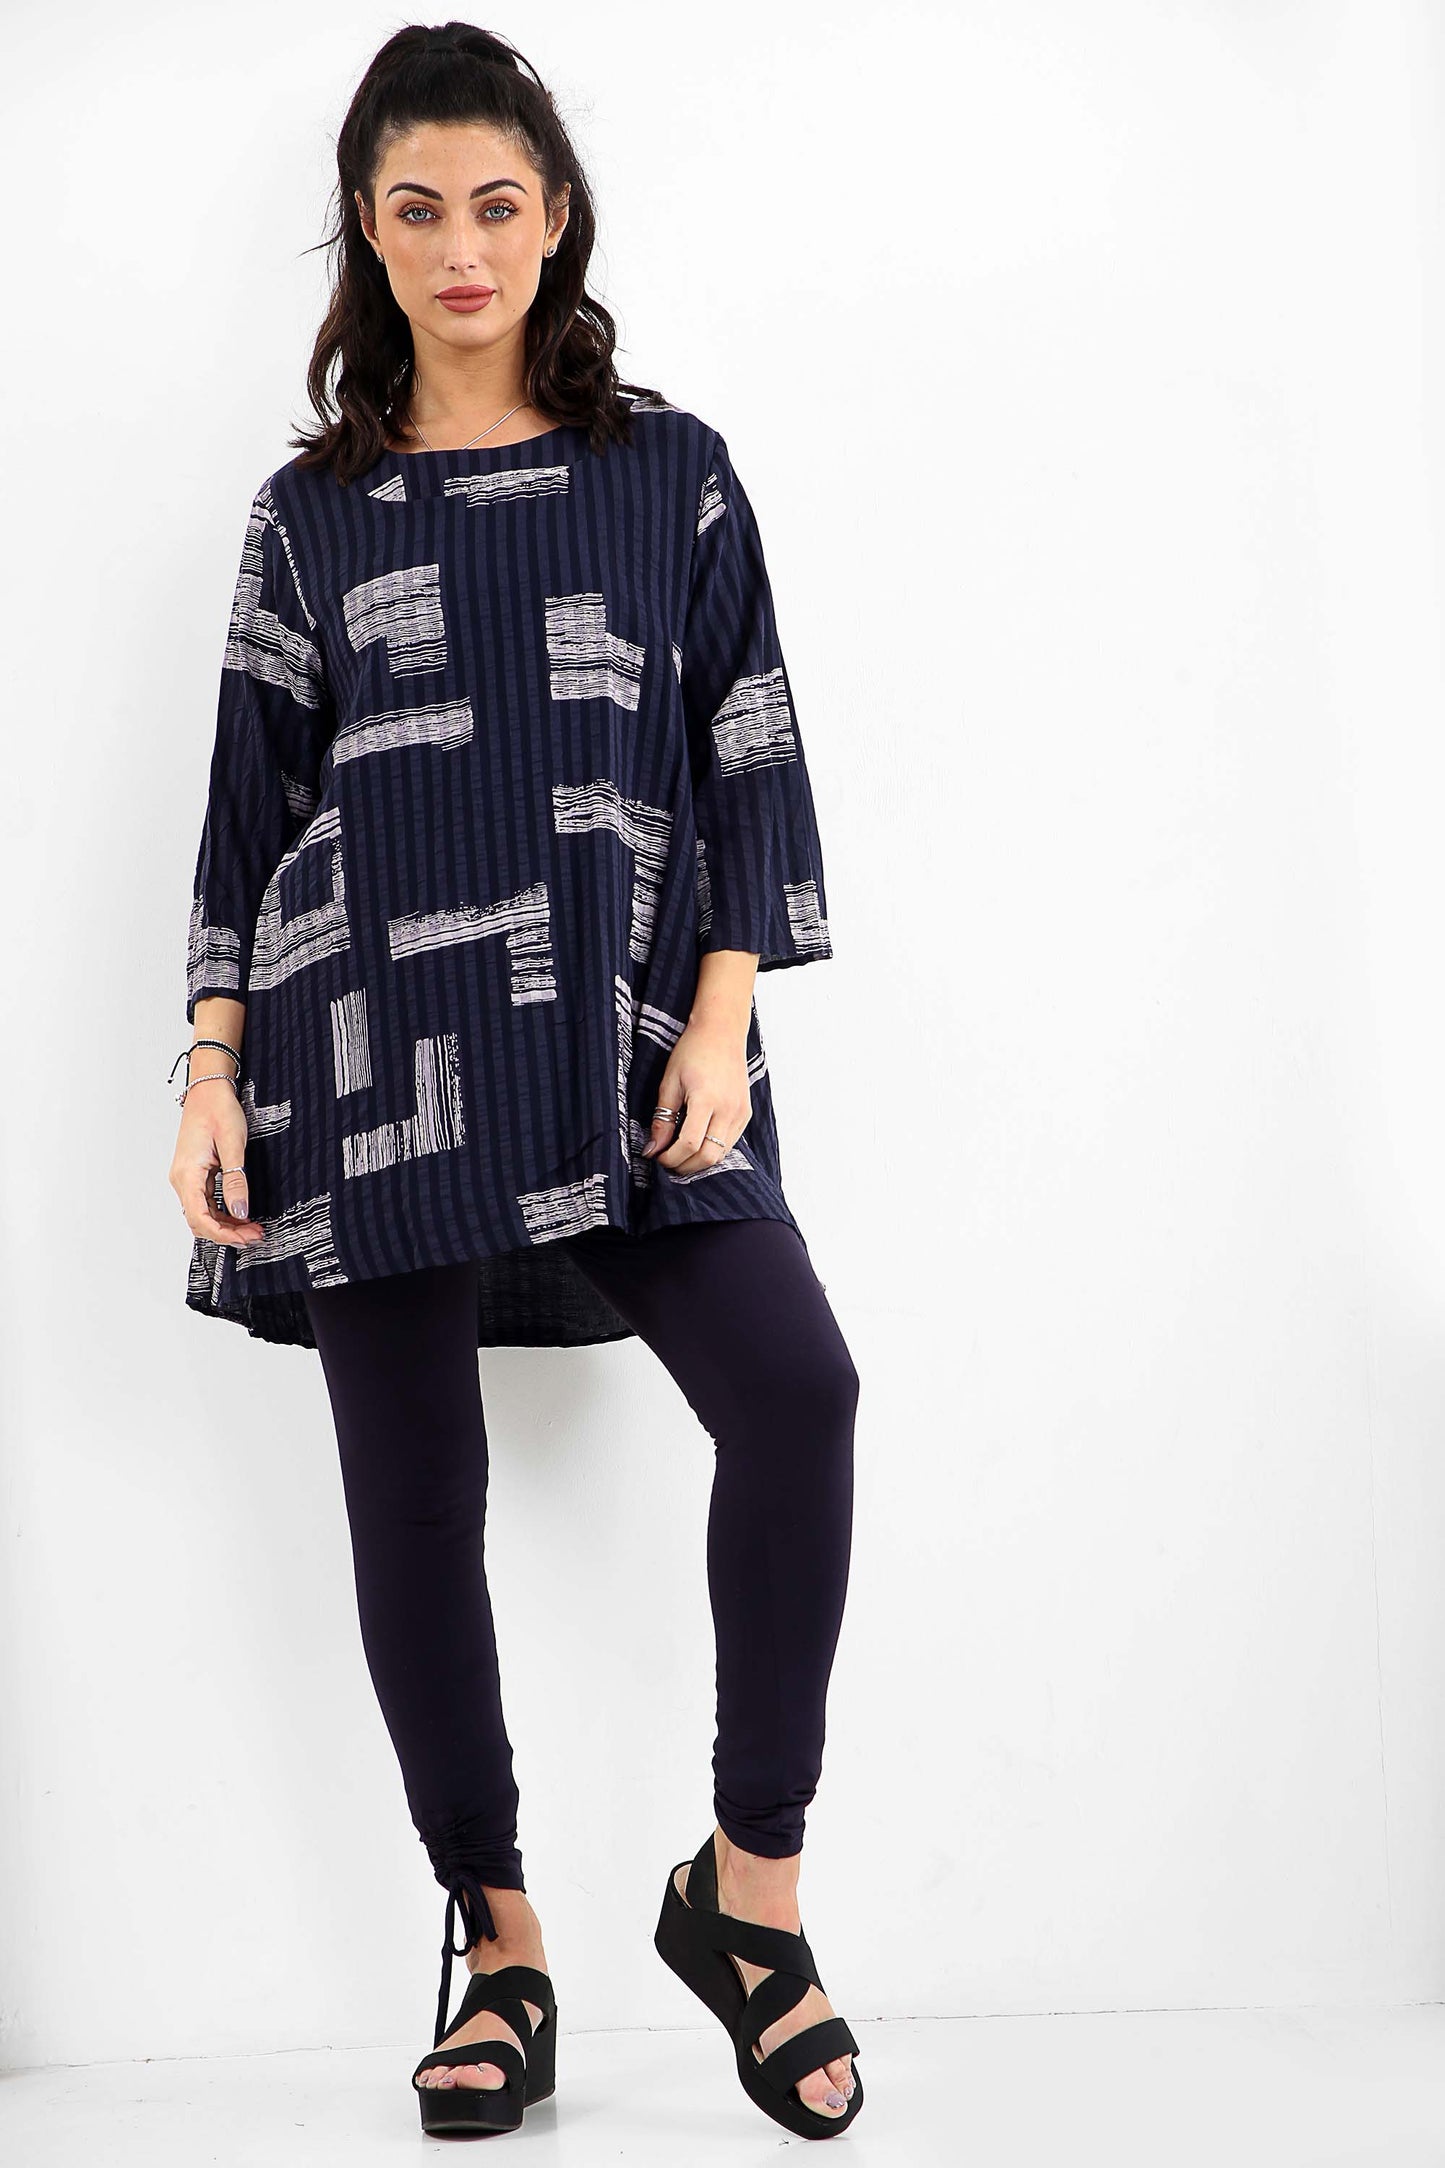 Tunic blouse with rectilinear shapes